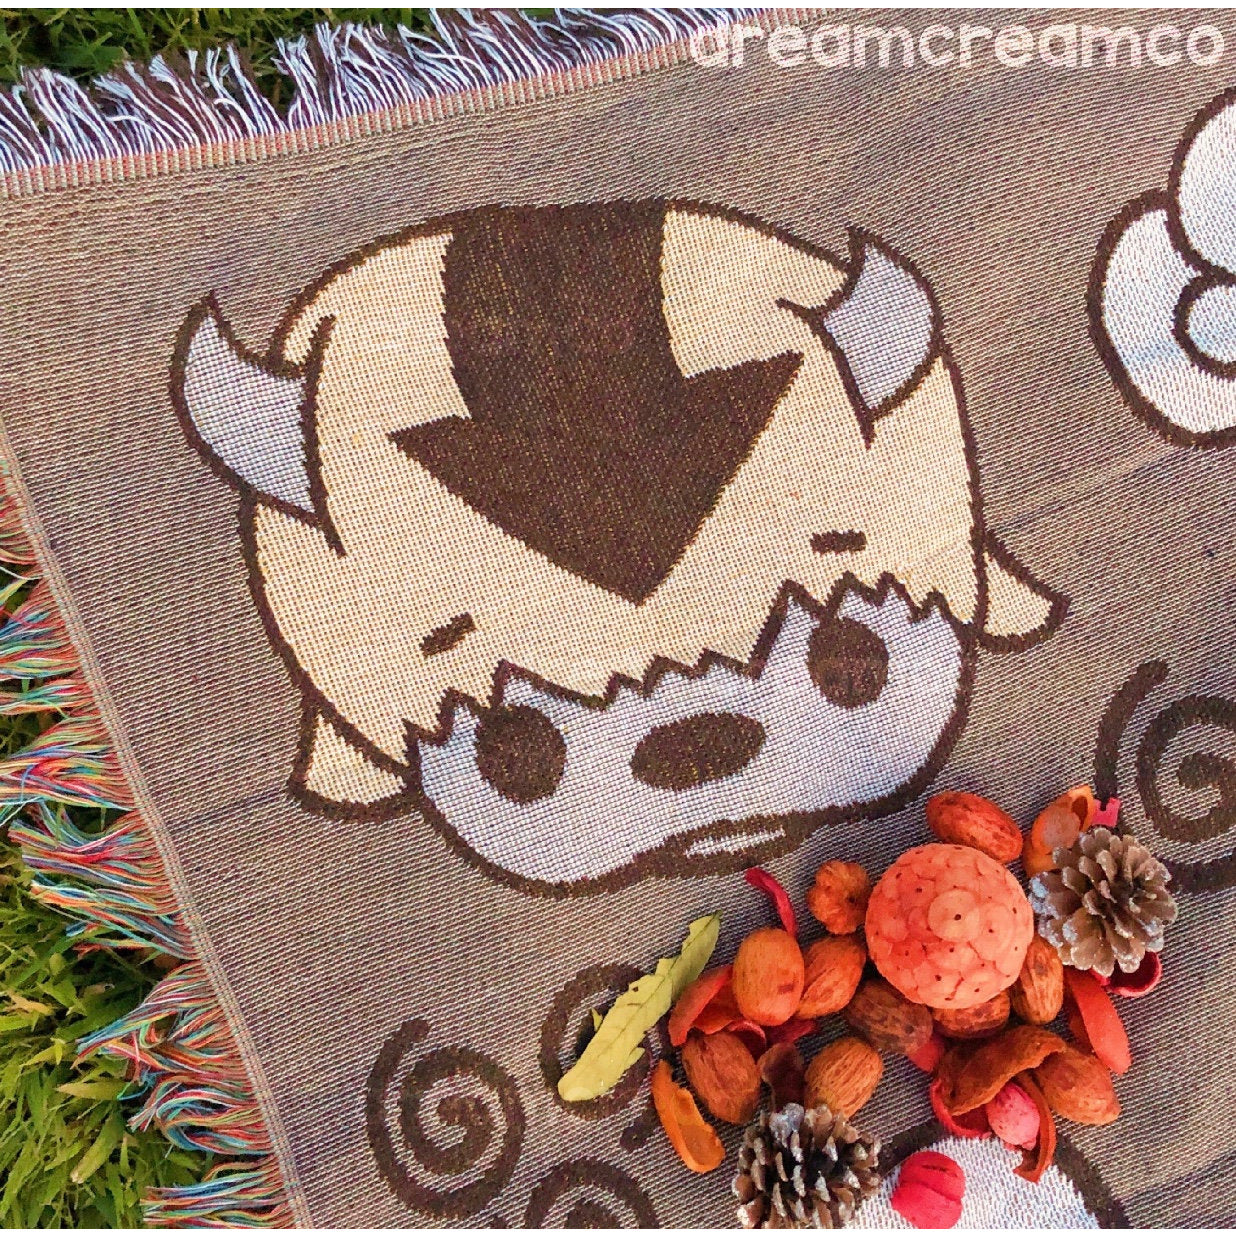 Cloudy Appa Woven Tapestry Blanket